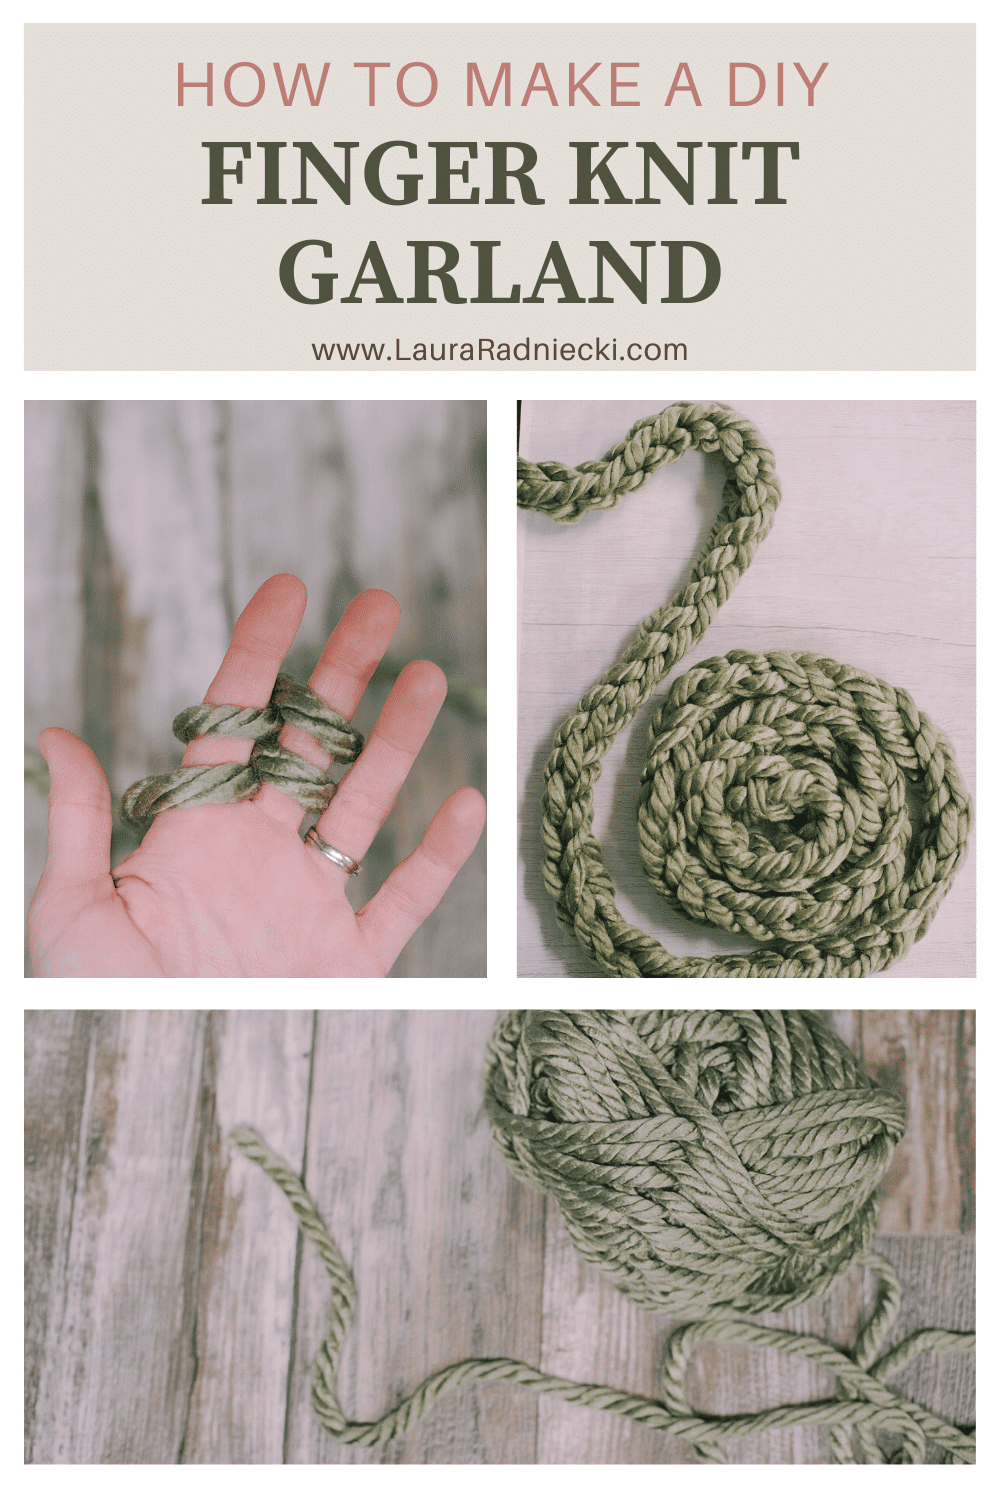 How to Make a DIY Finger Knit Garland with Chunky Yarn